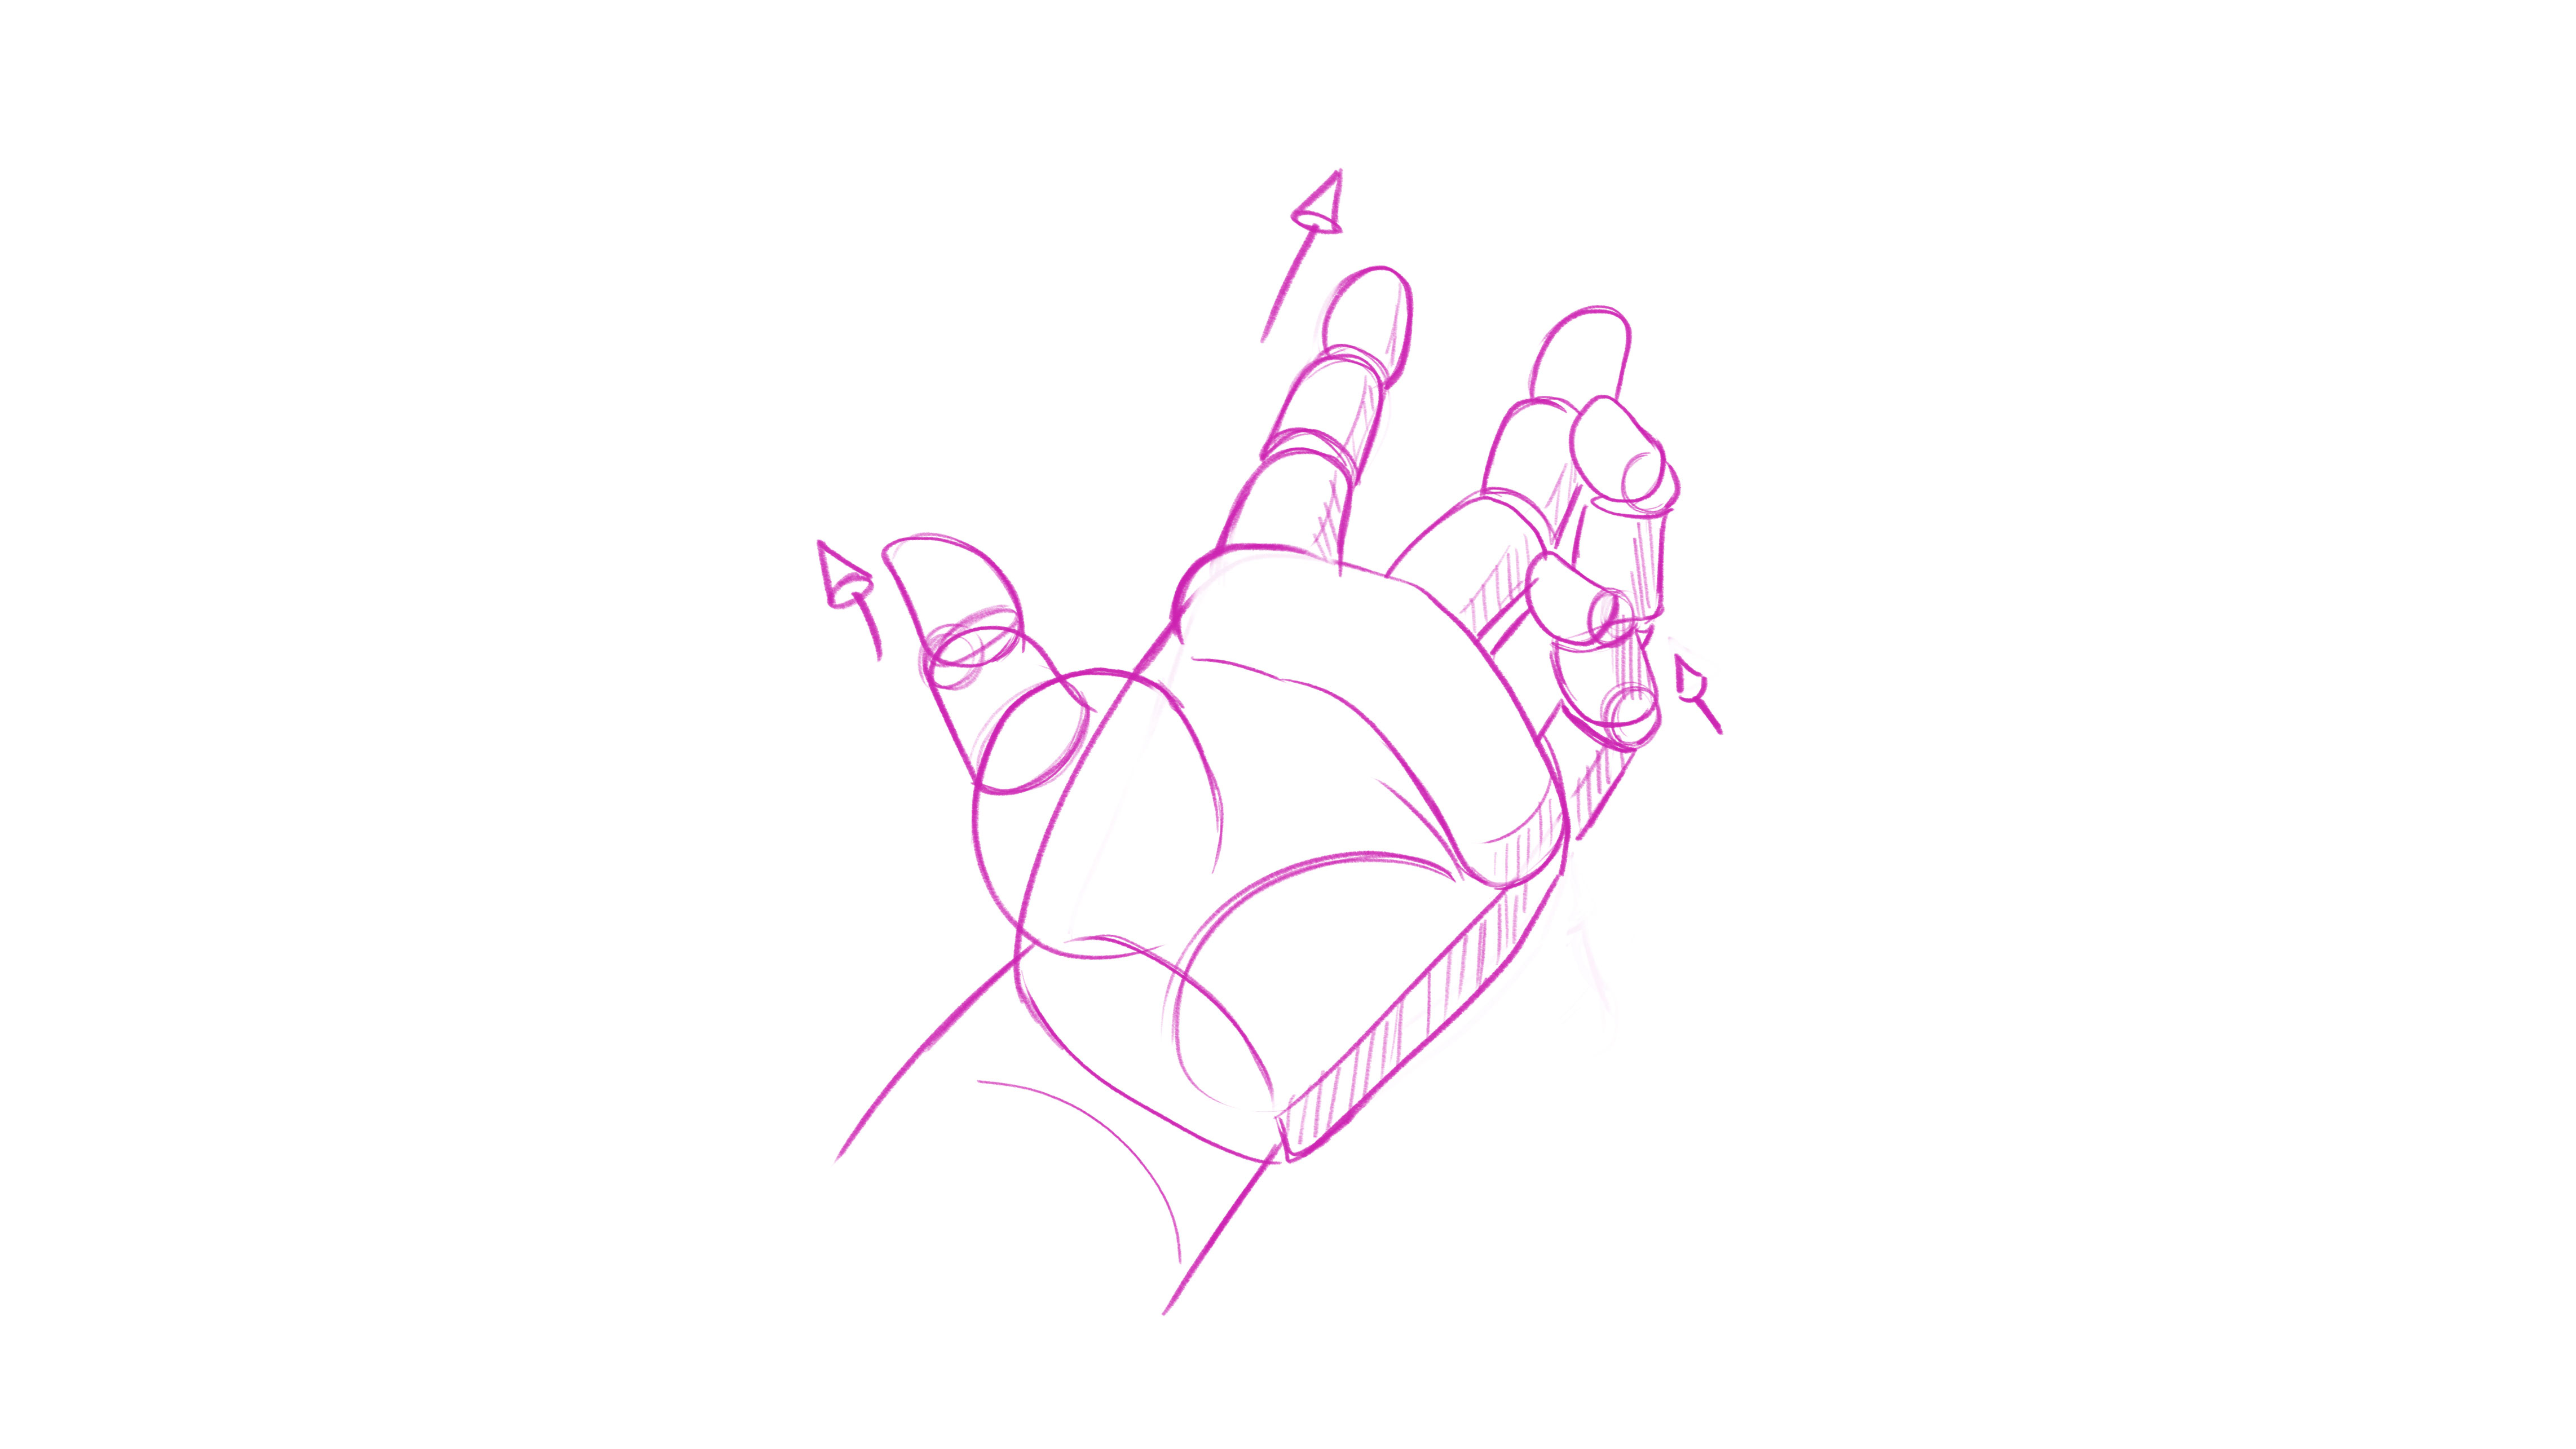 How to draw hands: sketch with planes